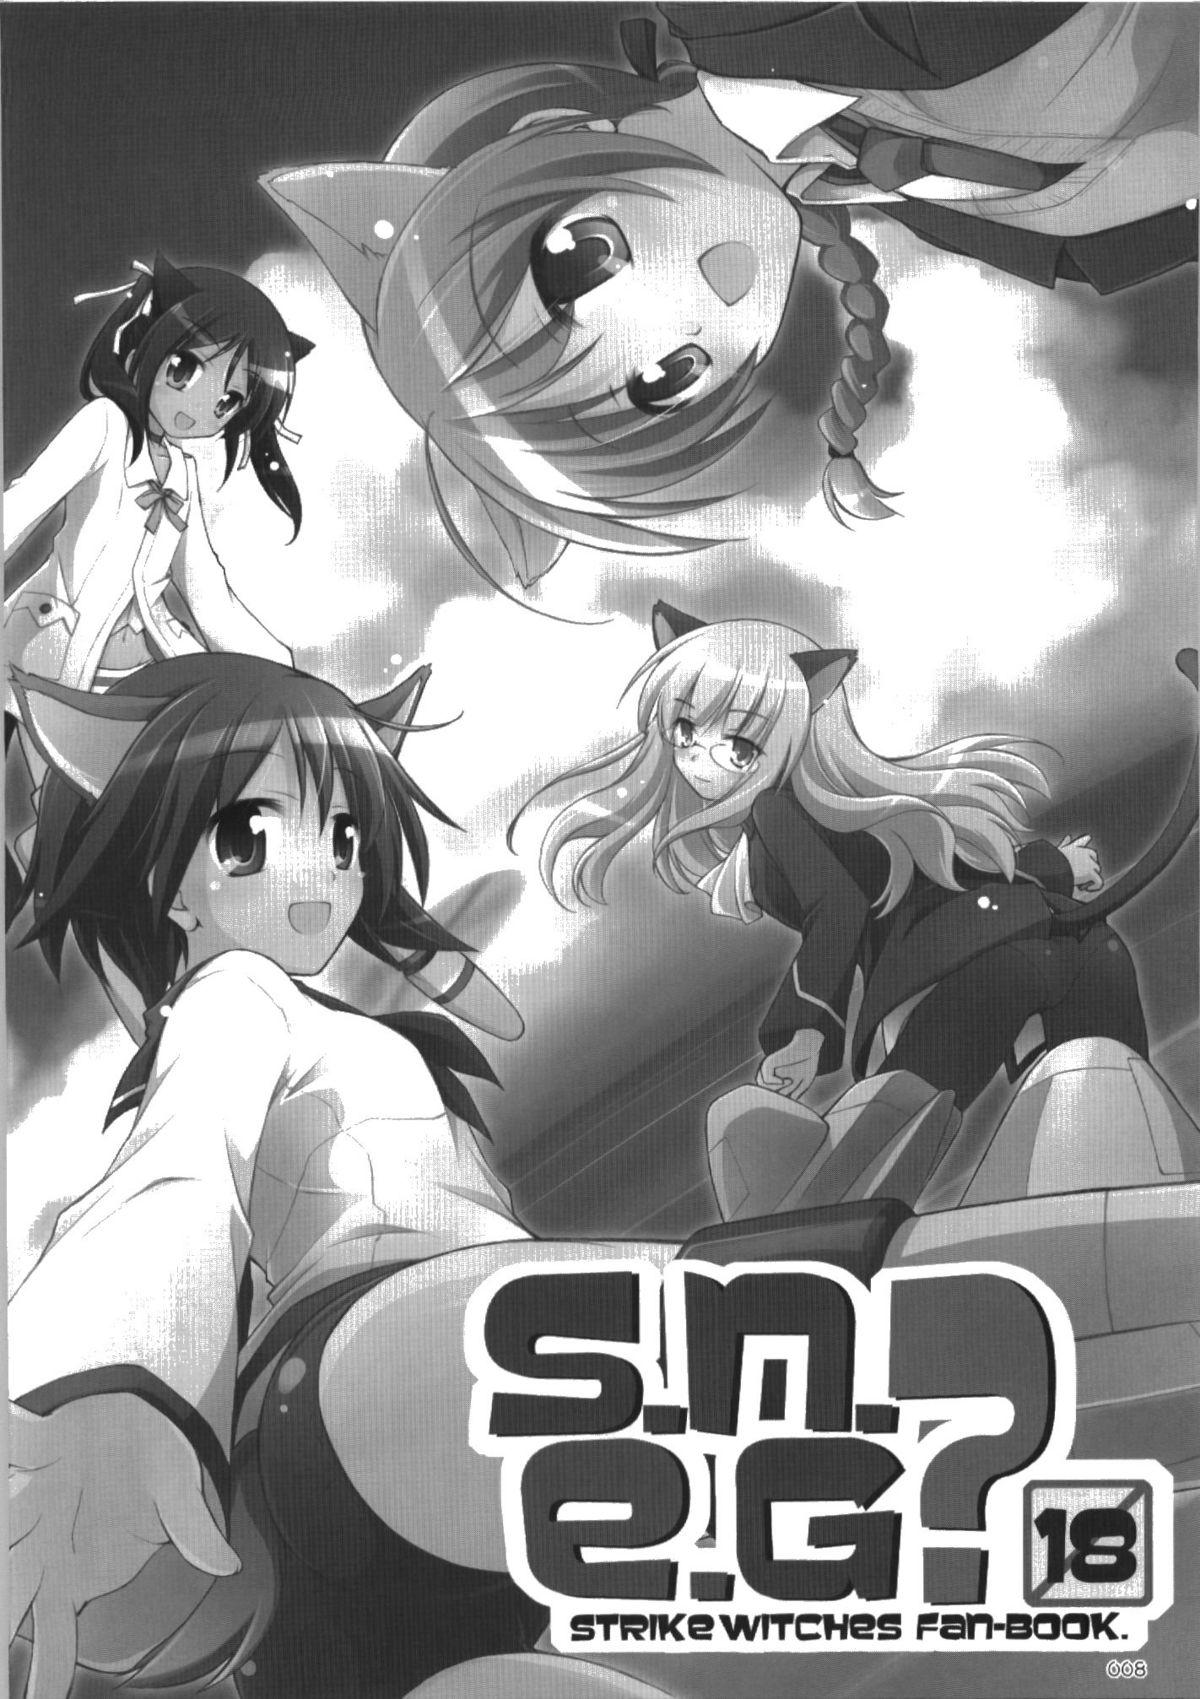 Big breasts s.n.e.g? - Strike witches Tiny Titties - Page 8